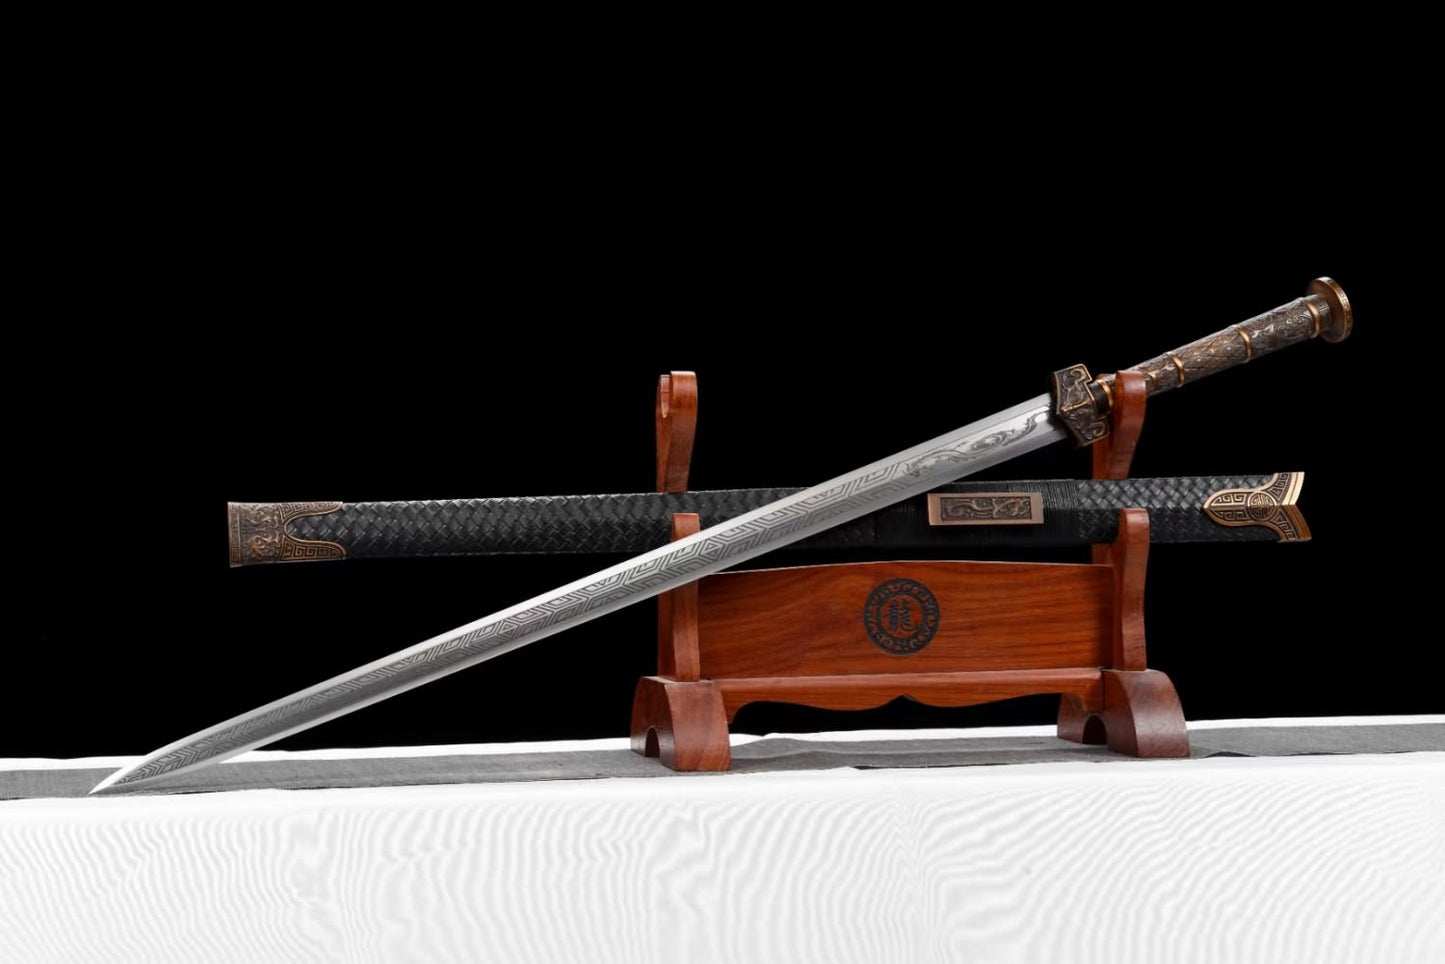 Longyuan jian Sword Forged High Carbon Steel Etched Blade,Alloy Fittings,Solid Wood Scabbard